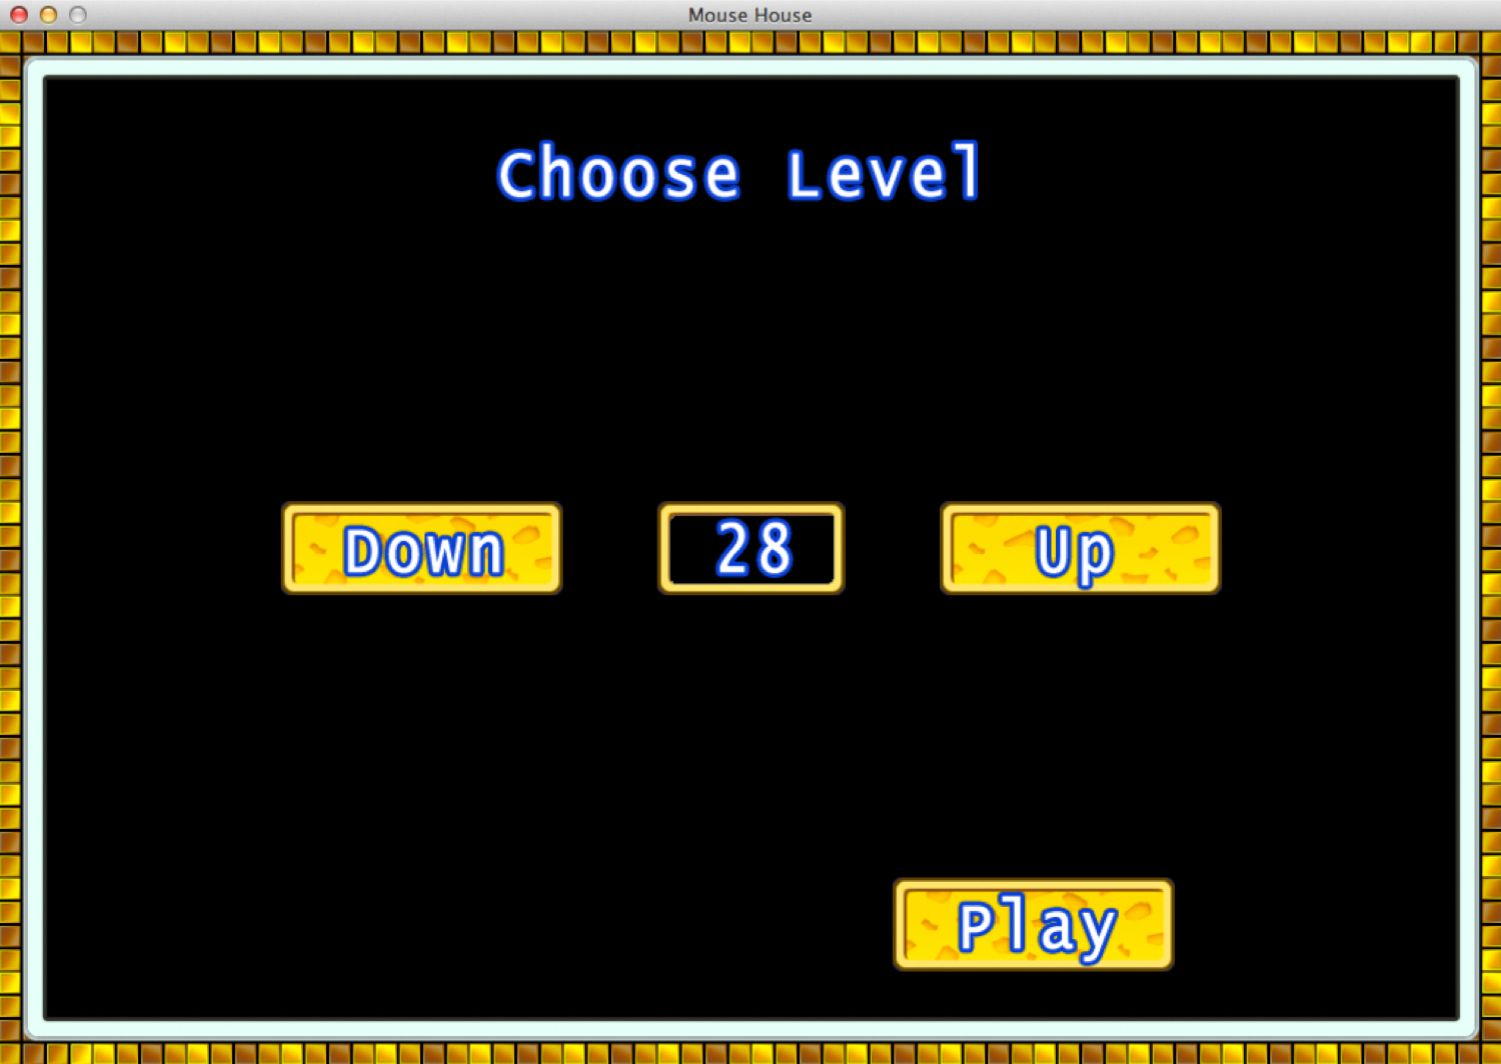 Mouse House 2.0 : Level Selection